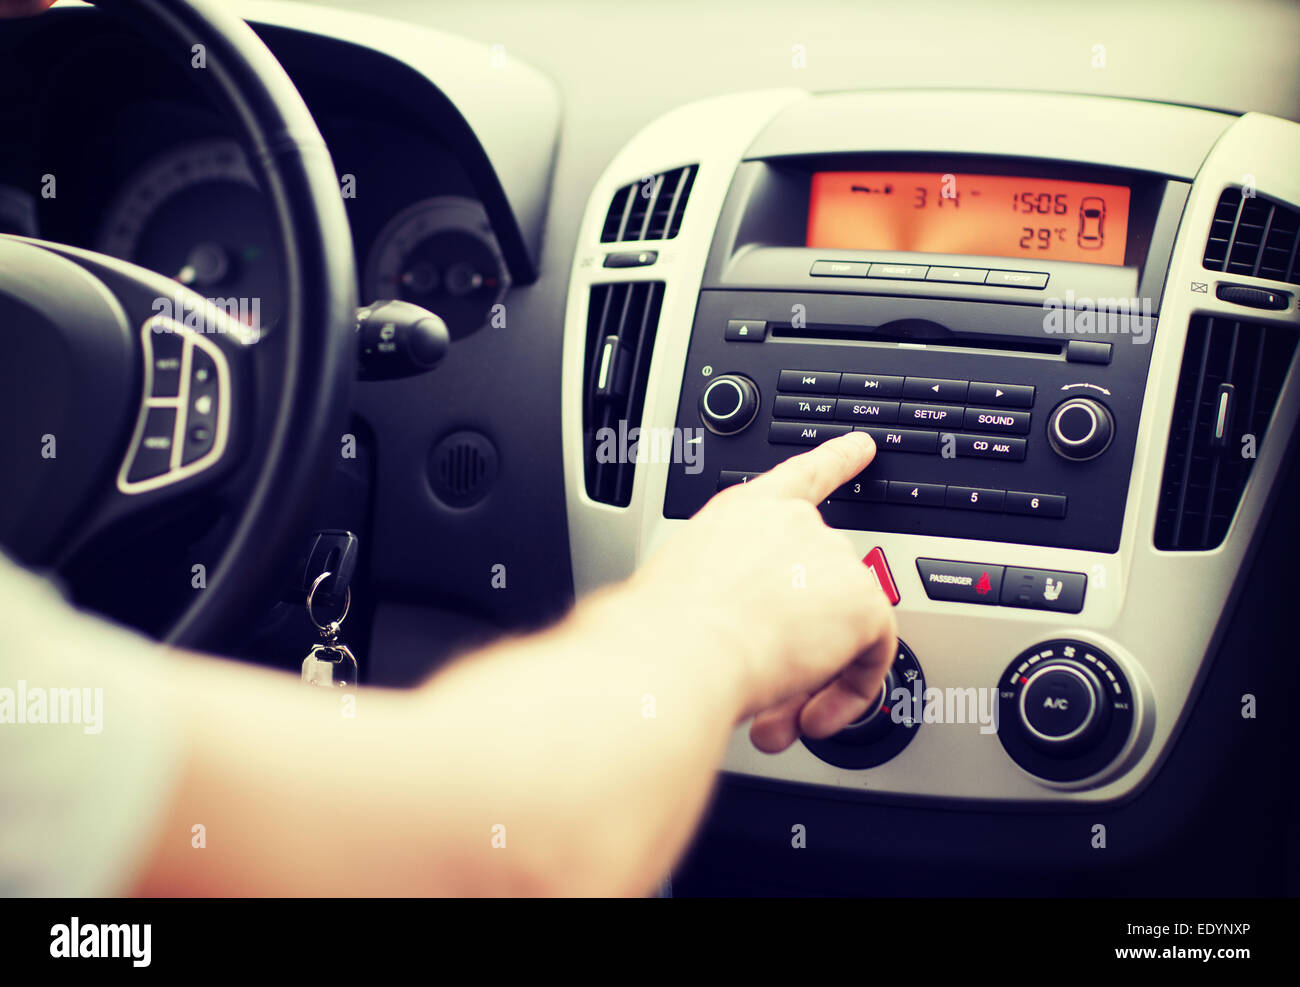 man using car audio stereo system Stock Photo